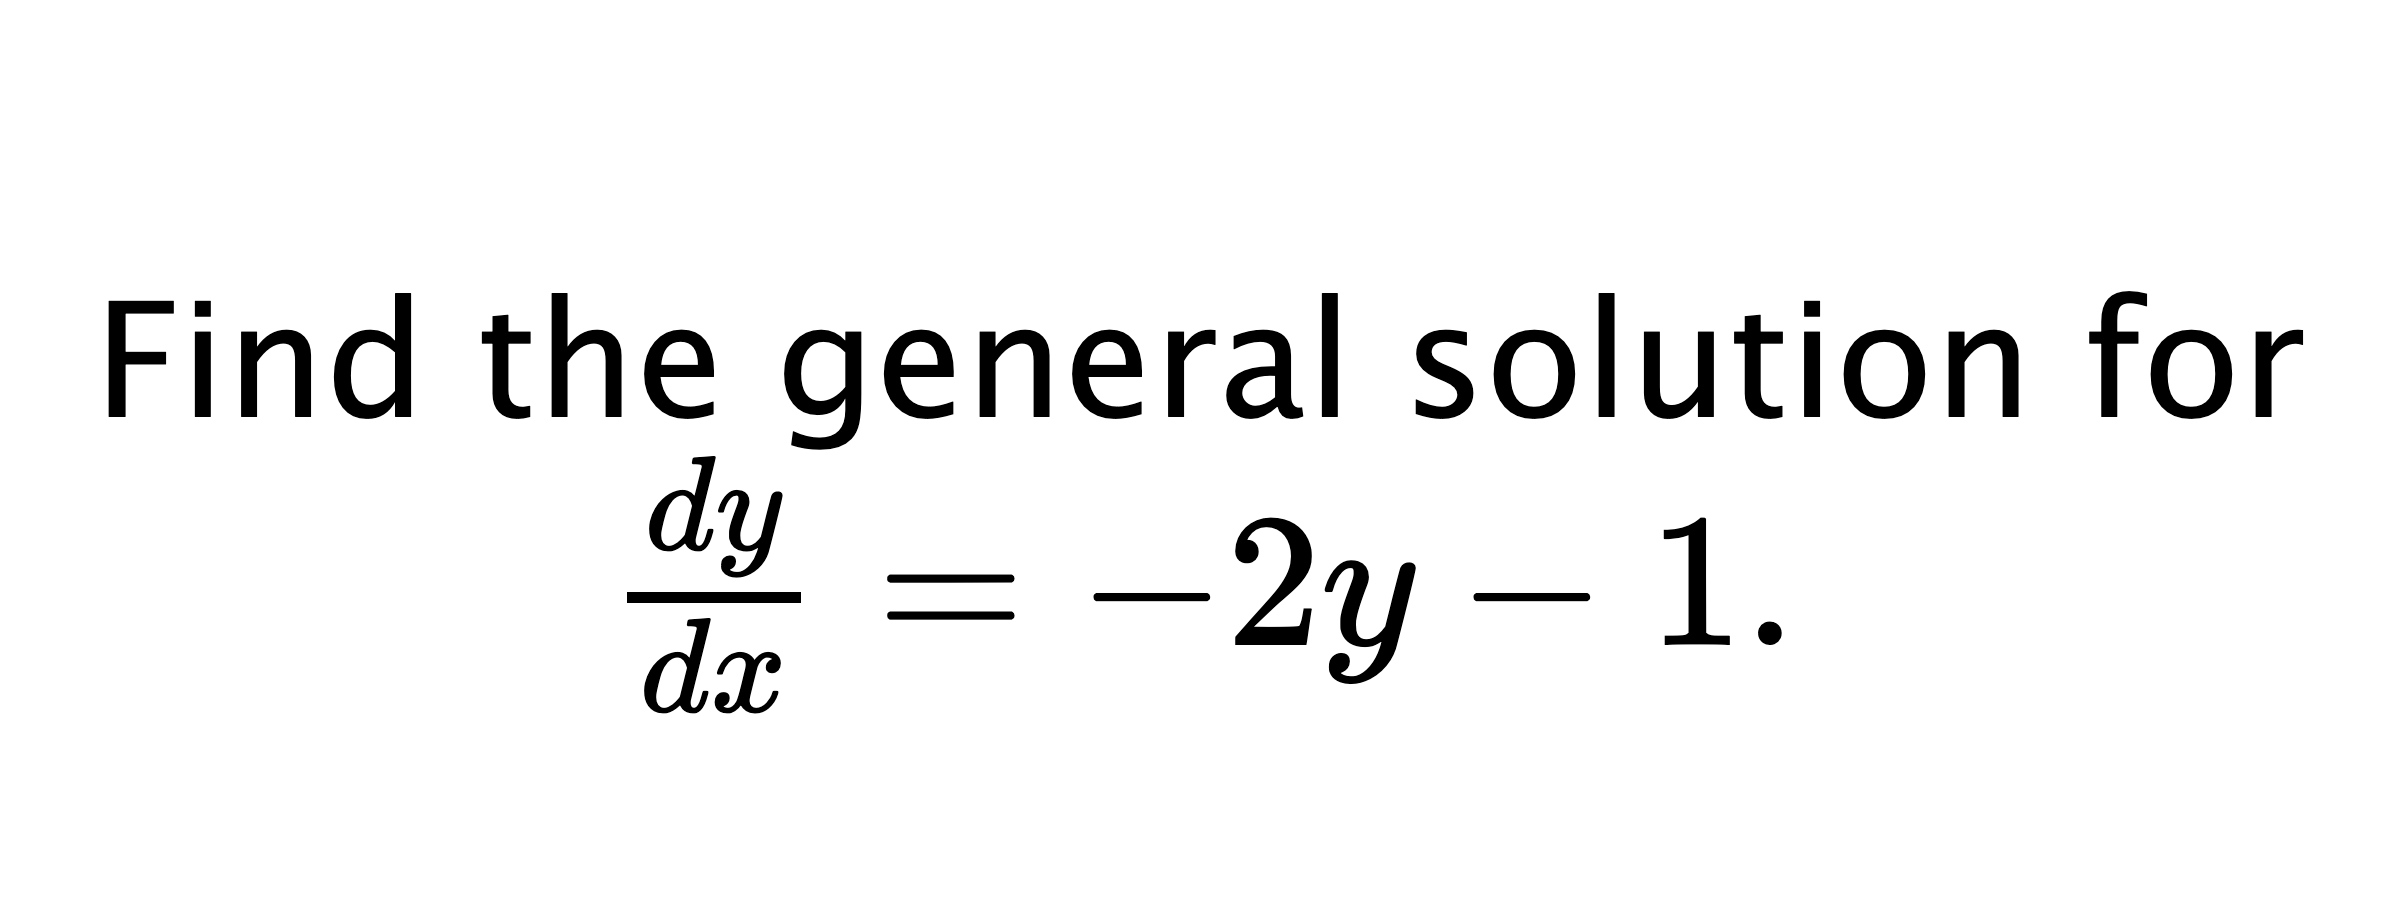  Find the general solution for $ \frac{dy}{dx}=-2y-1. $